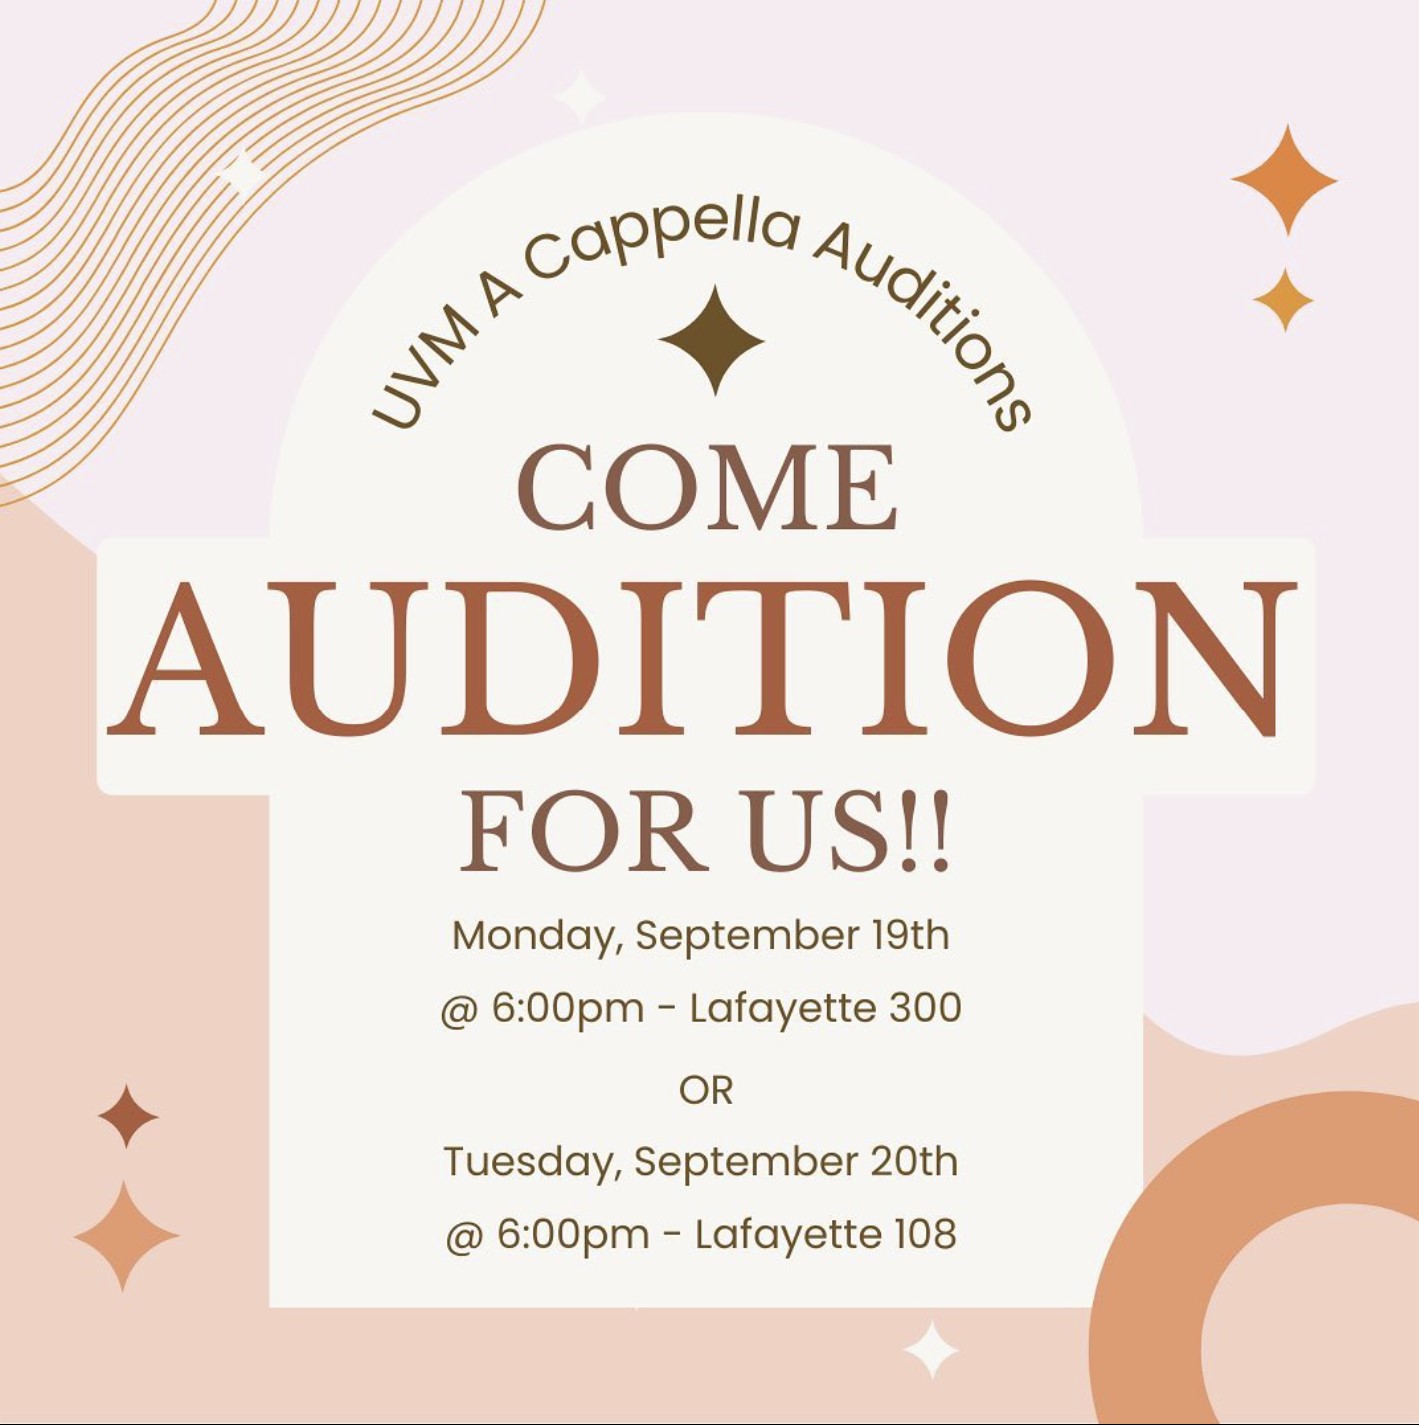 An image with details for a capella auditions.